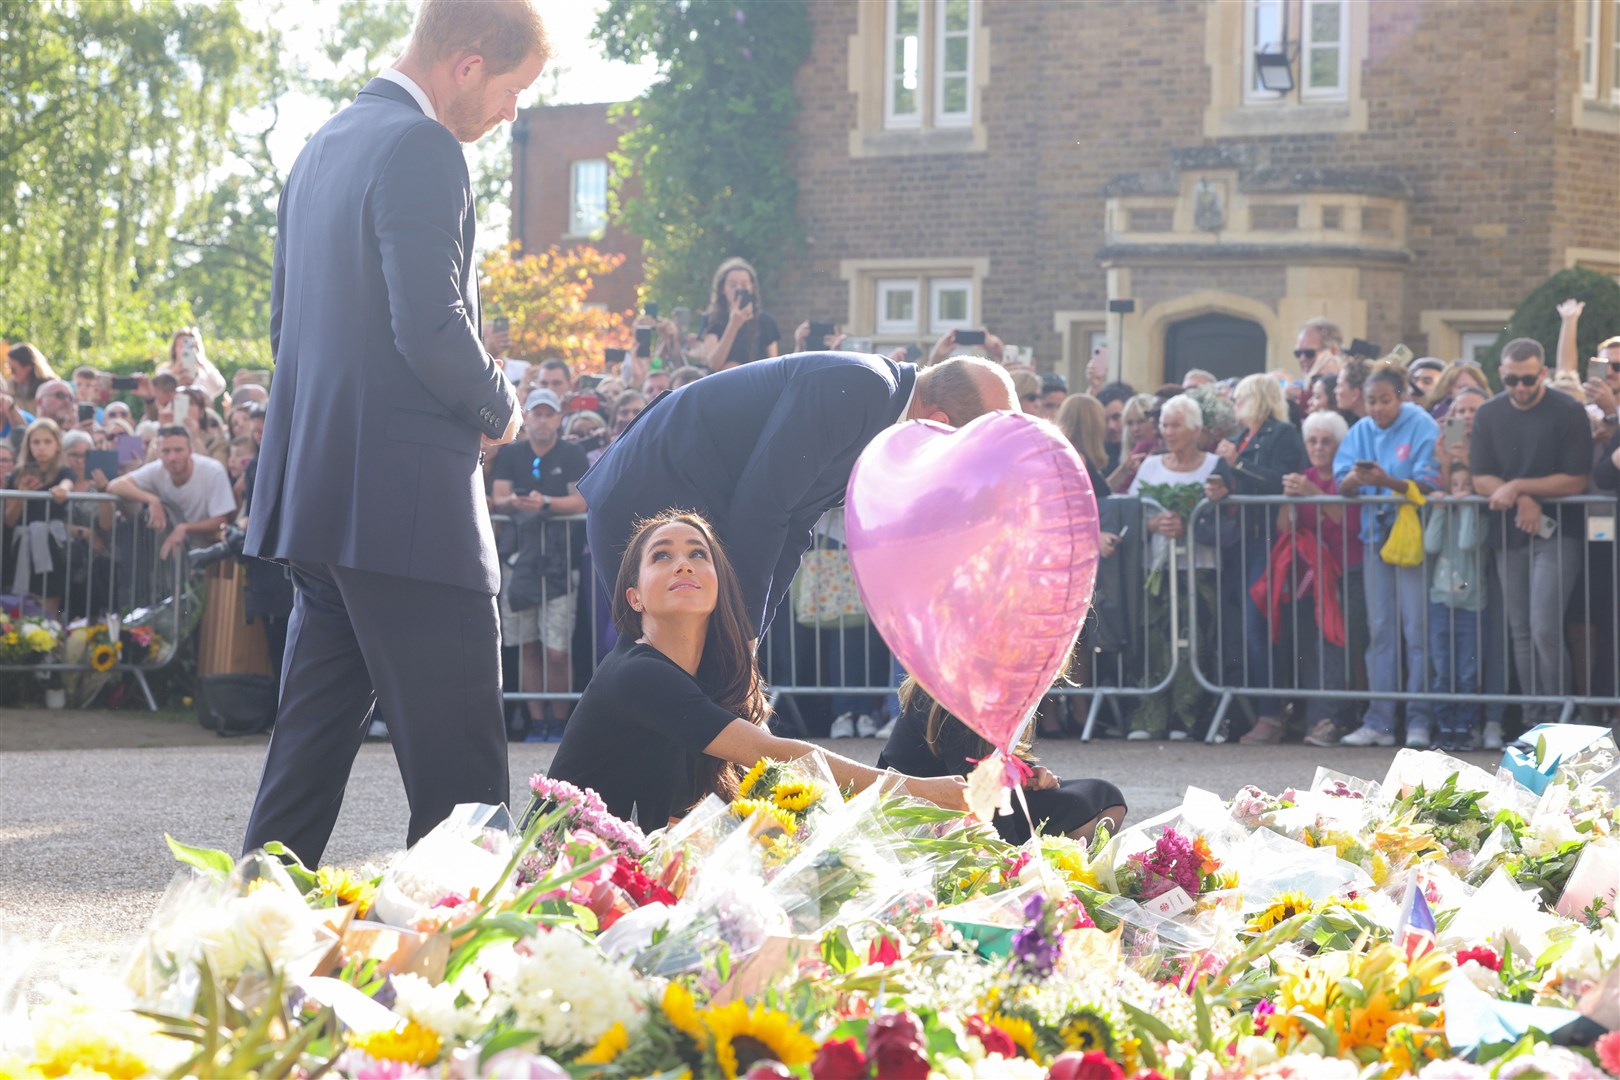 The Prince and Princess of Wales and the Duke and Duchess of Sussex viewing the messages and floral tributes left by members of the public at Windsor Castle in Berkshire (PA)